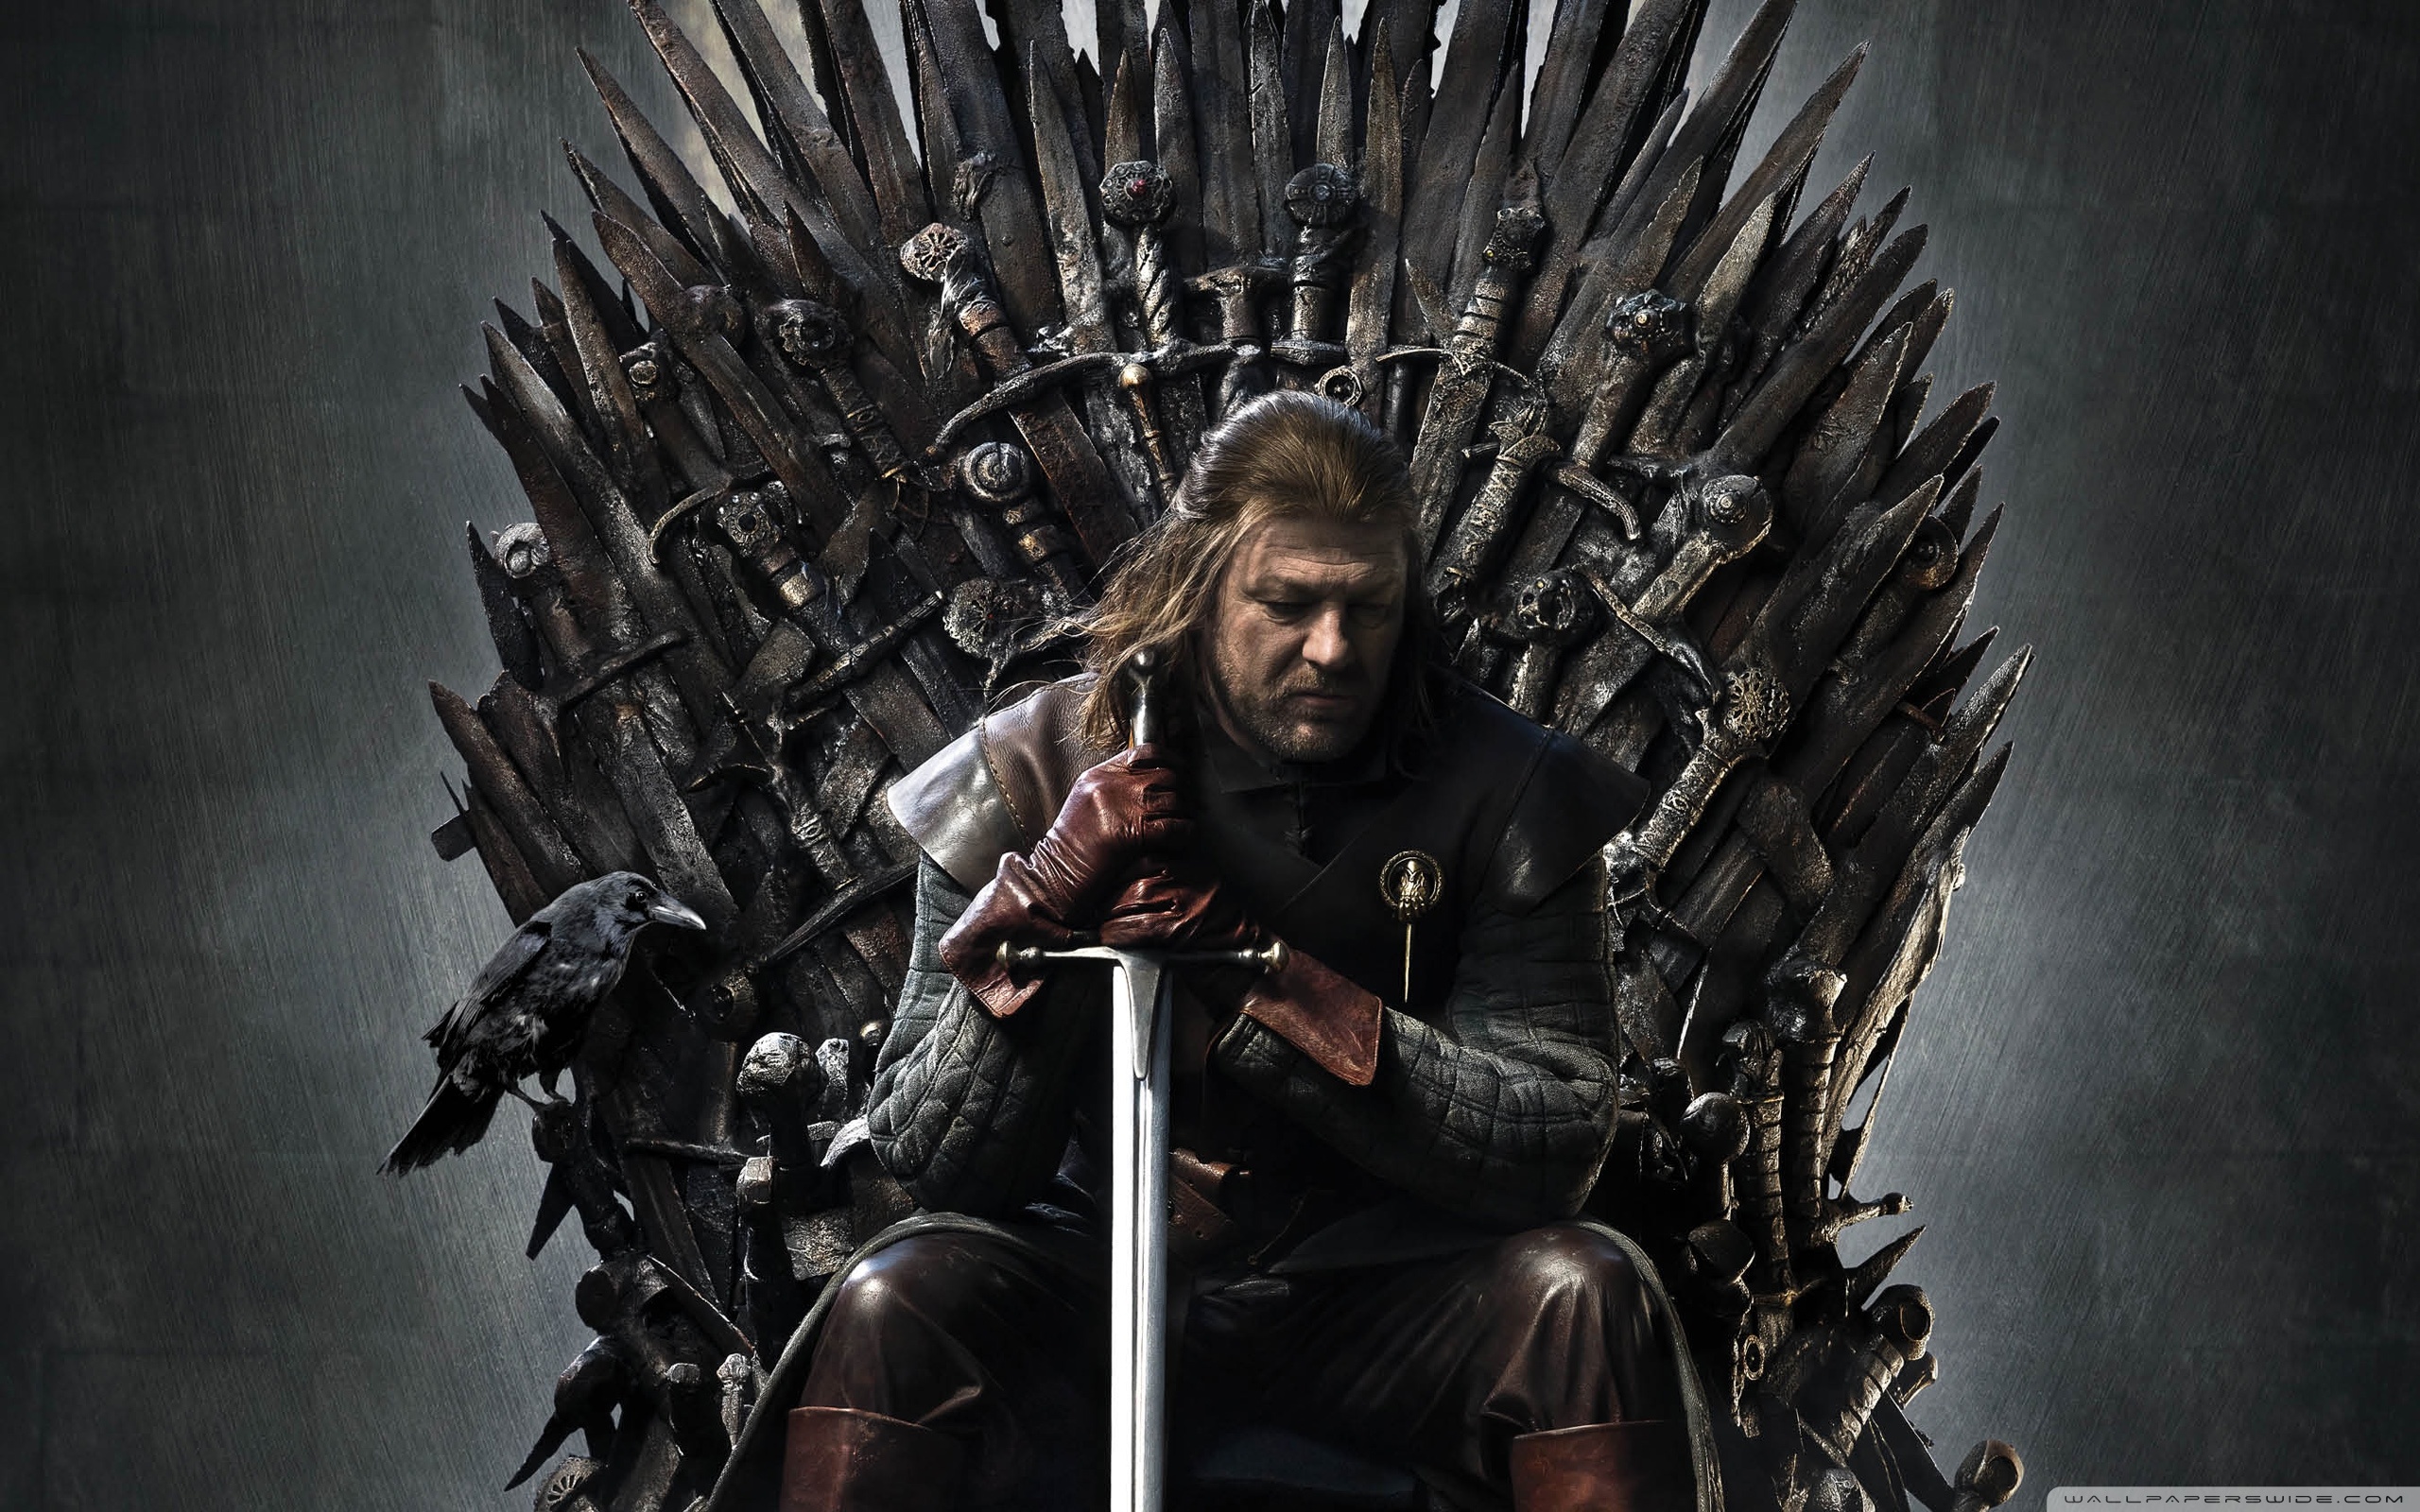 Download Game Of Thrones 2013 HD Wallpaper 2006 Full Size